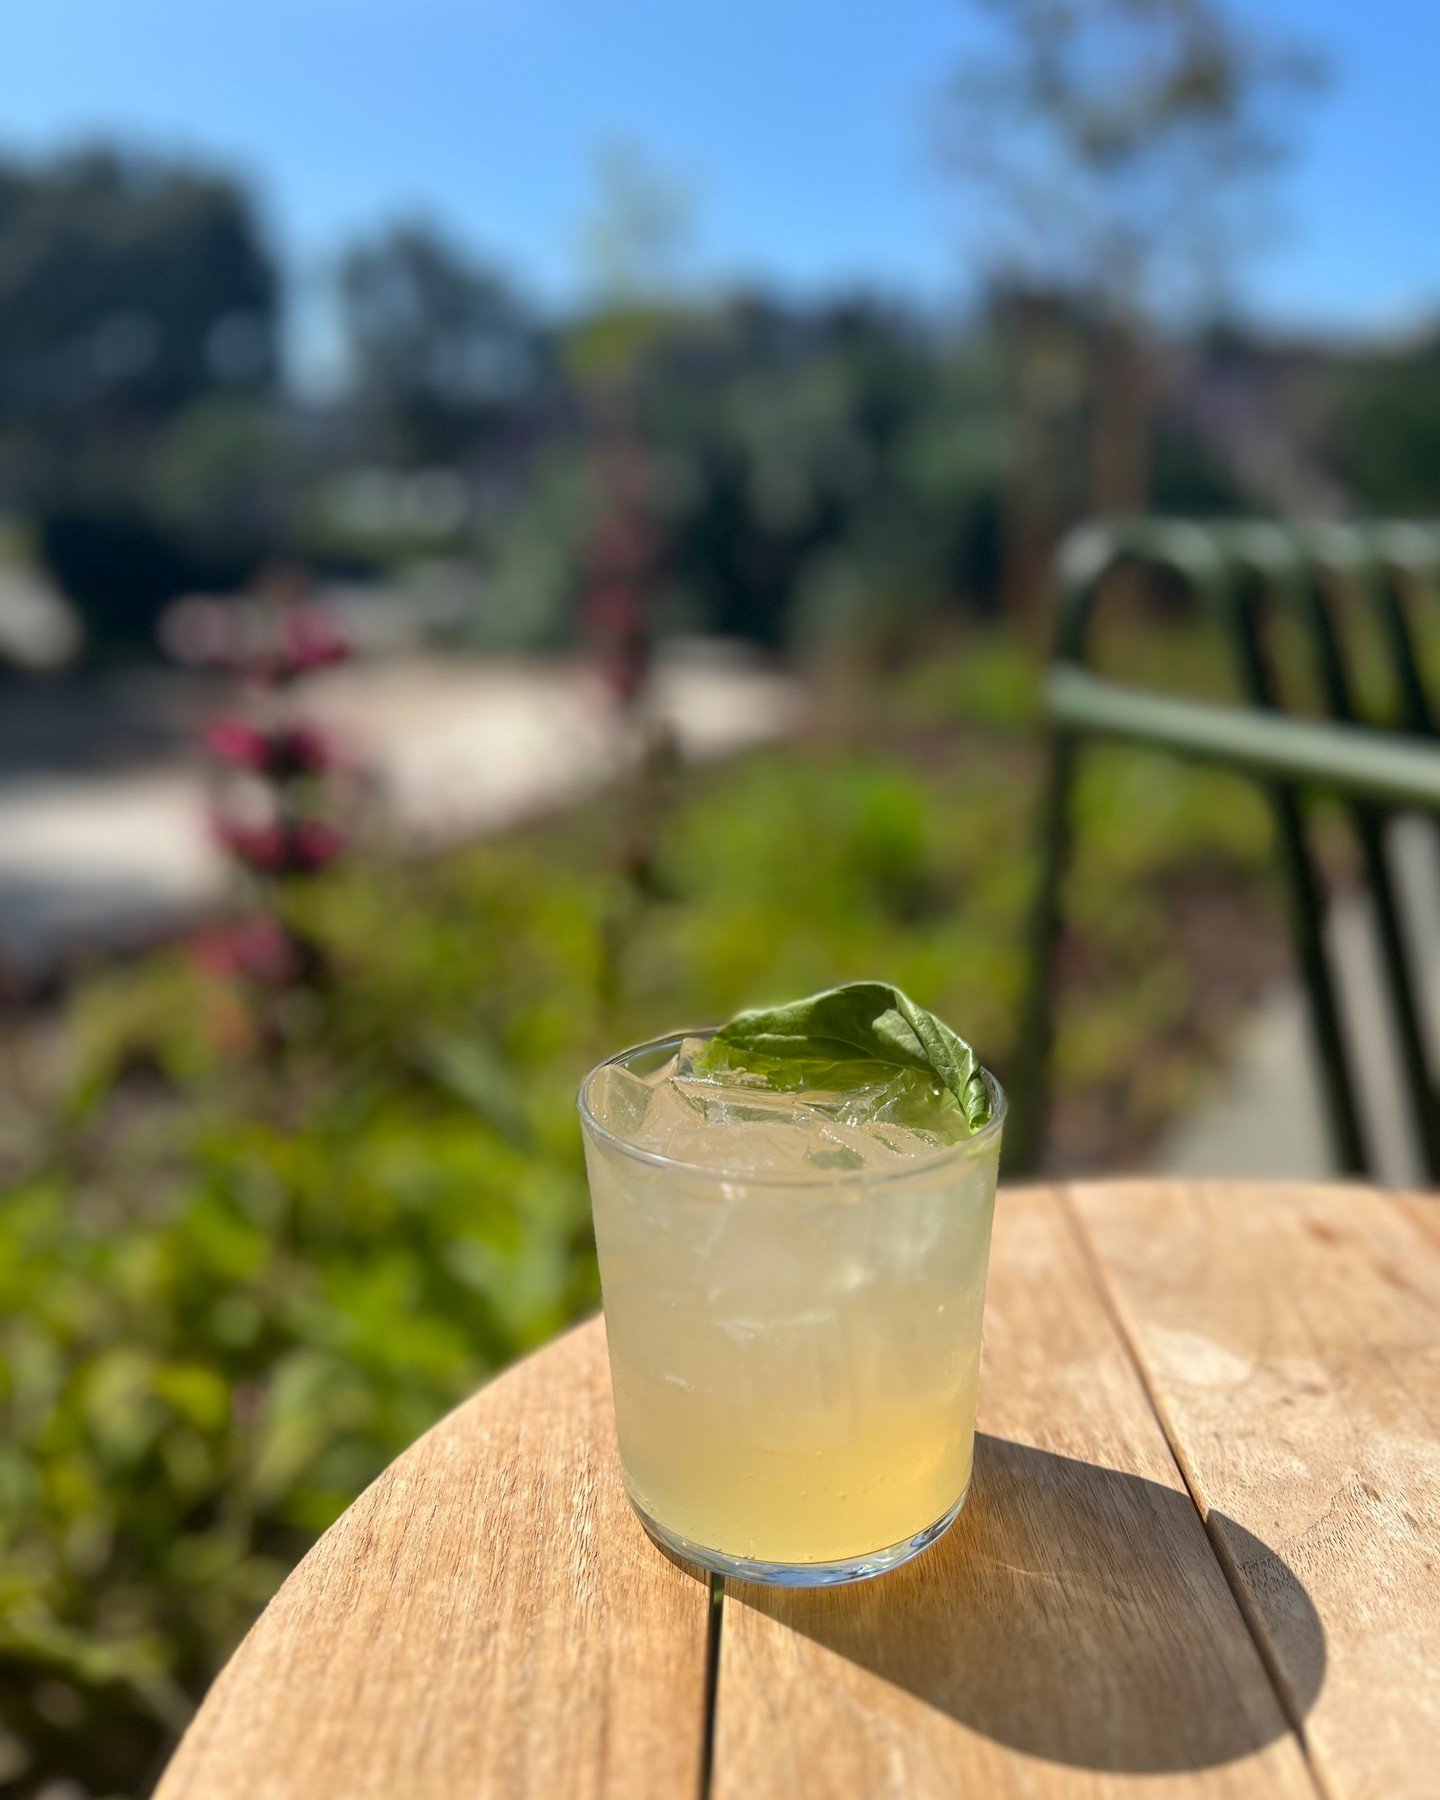 Sip on the perfect blend of sweet and fresh with our new spring cocktail, Lemonade Basil Breeze 🍋🌿 Enjoy every sip under the sun on our beautiful patio. It's the ultimate way to embrace the season in style.

#springcocktails #patio #happyhouronthep